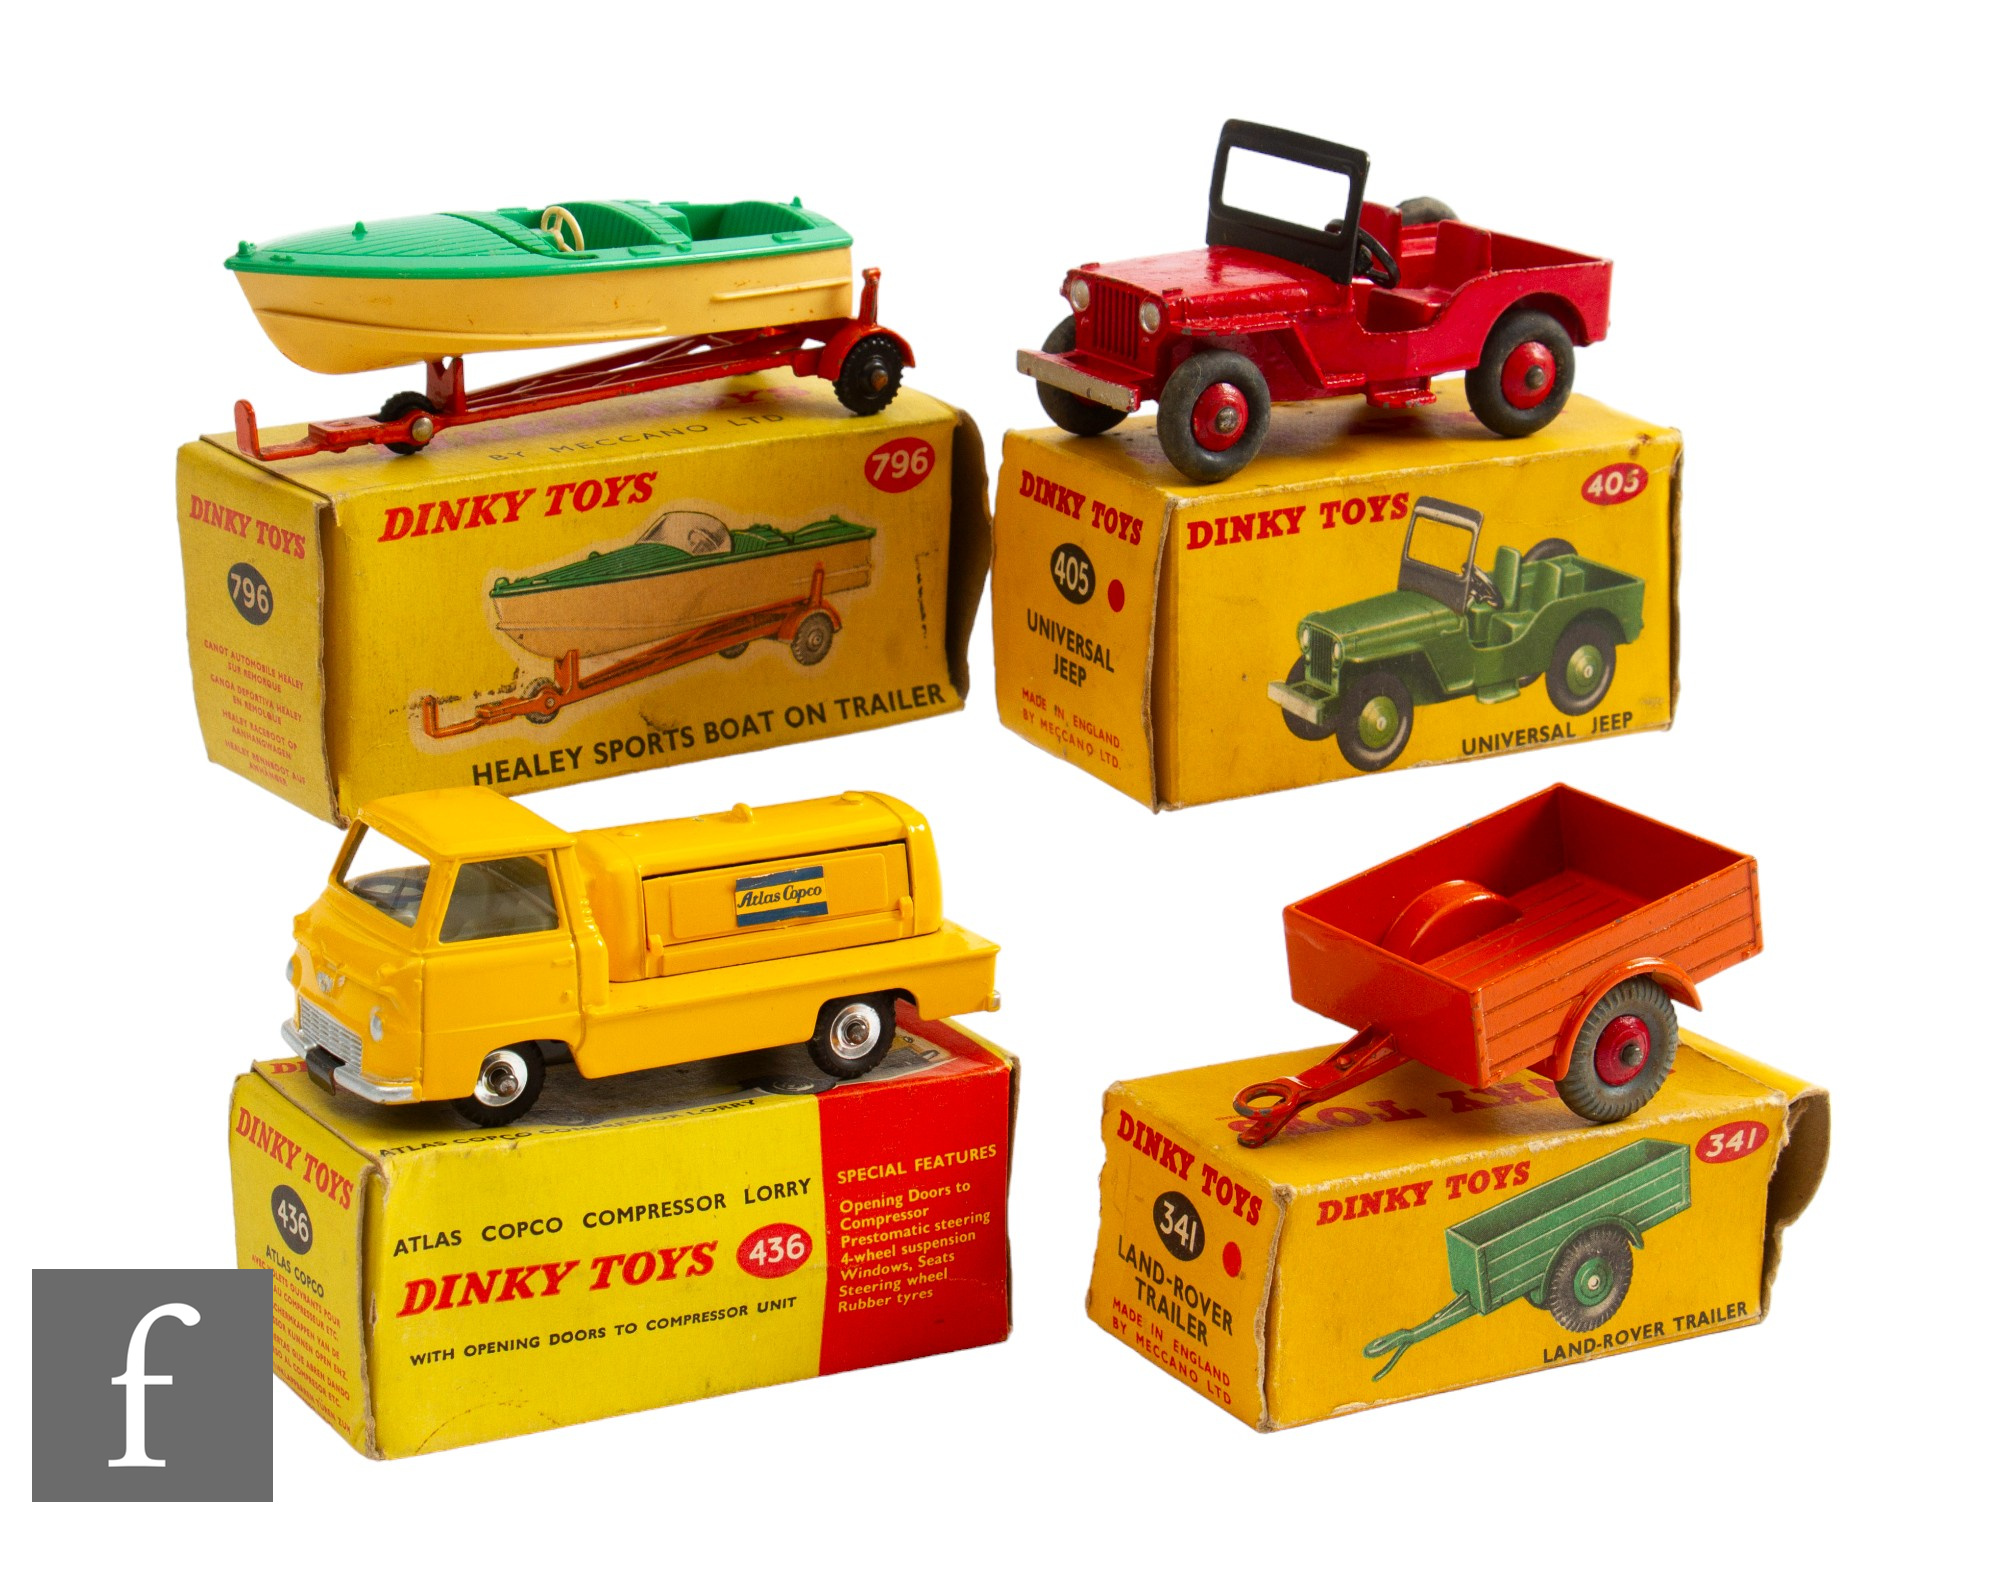 A collection of Dinky diecast models, 405 Universal Jeep in red, 436 Atlas Copco Compressor Lorry in